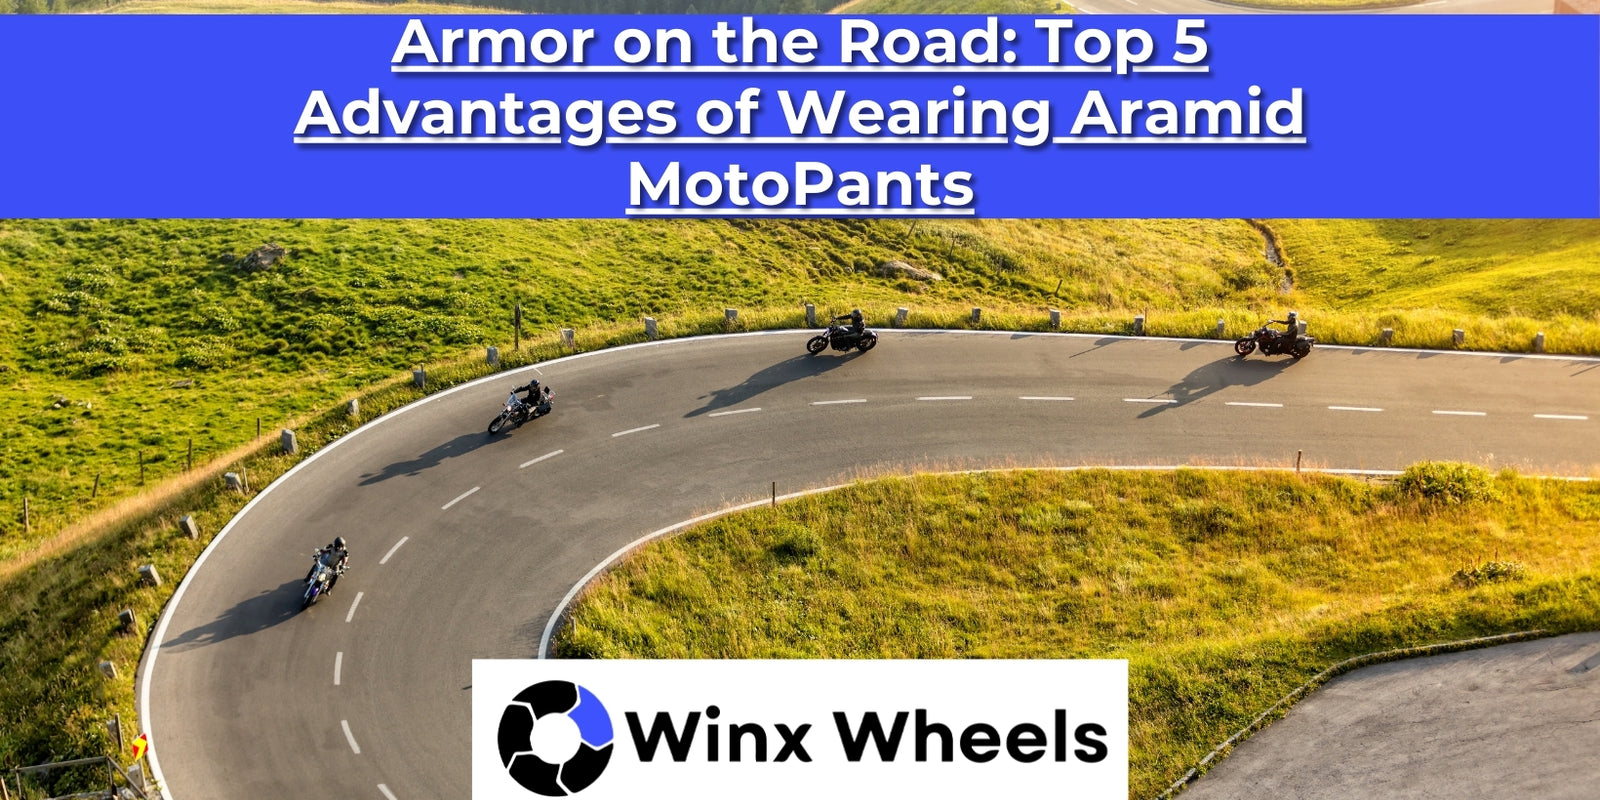 Armor on the Road Top 5 Advantages of Wearing Aramid MotoPants